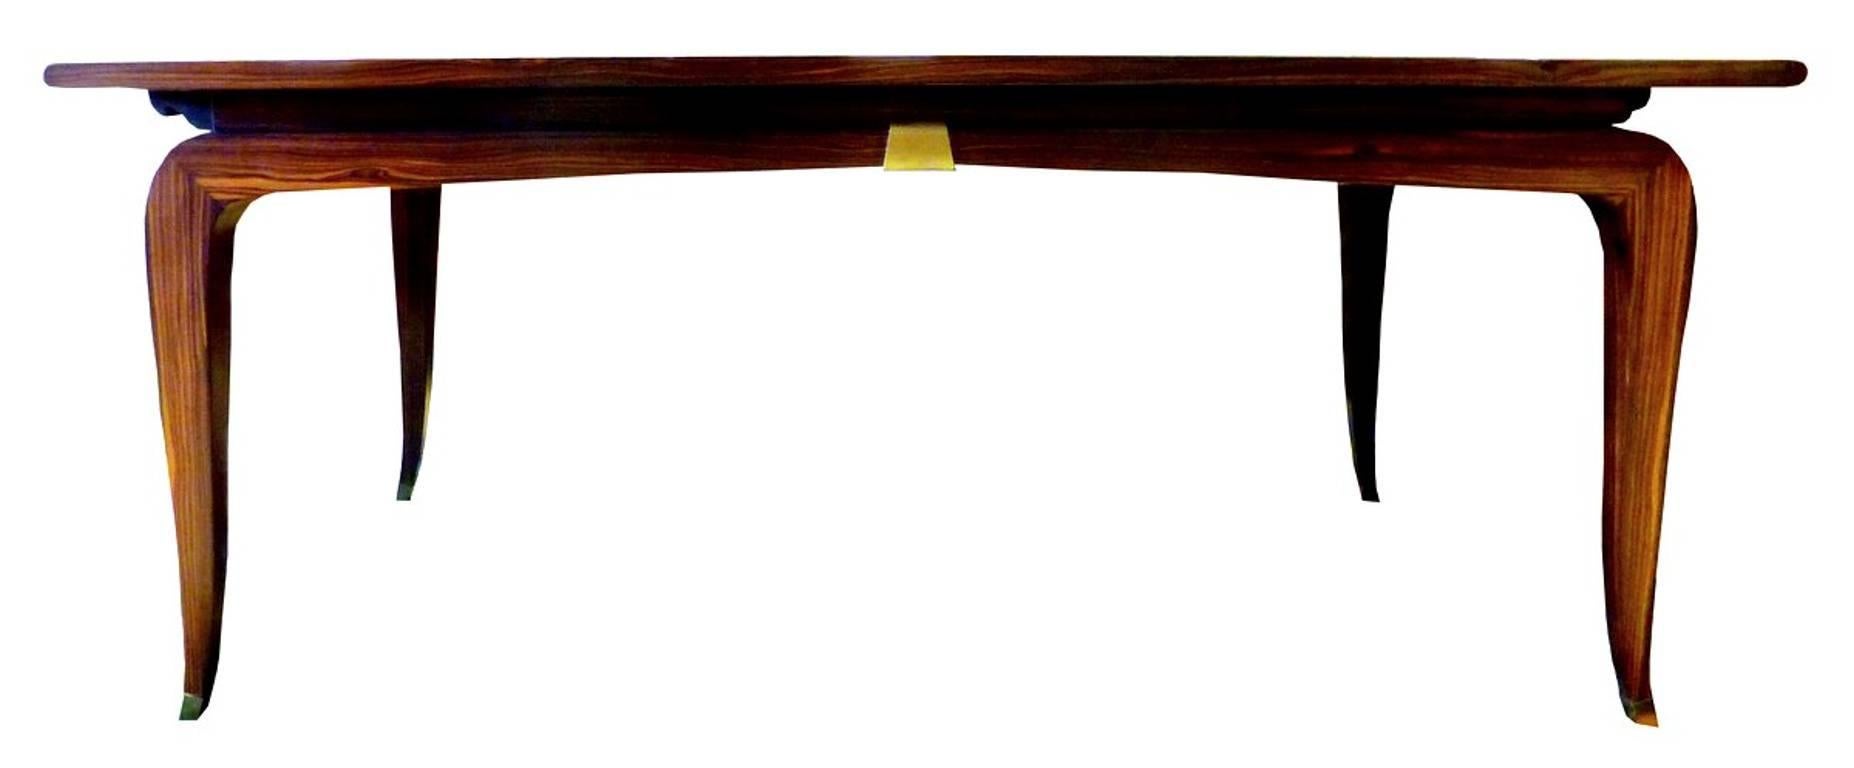 Due to the rare solid Macassar ebony construction, the gold dipped bronze mounts, the use of solid mahogany as a secondary wood, and the signature curve of the legs, we attribute this fine desk to celebrated French designers André Domin and Marcel